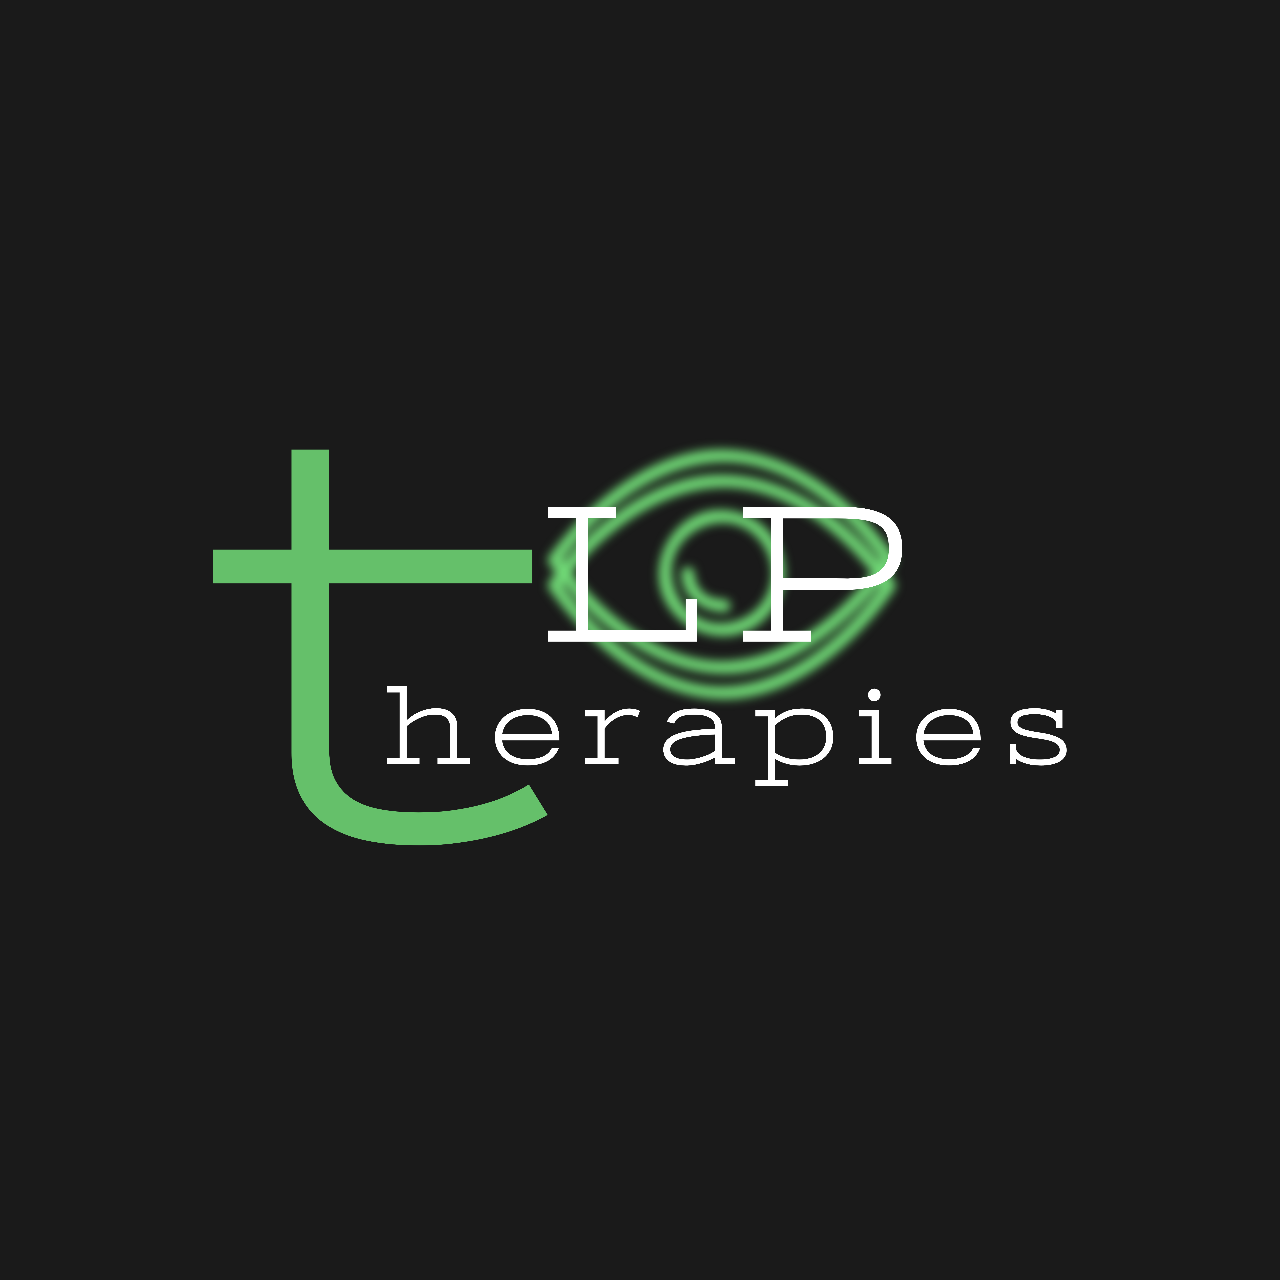 LP Therapy + Support Session